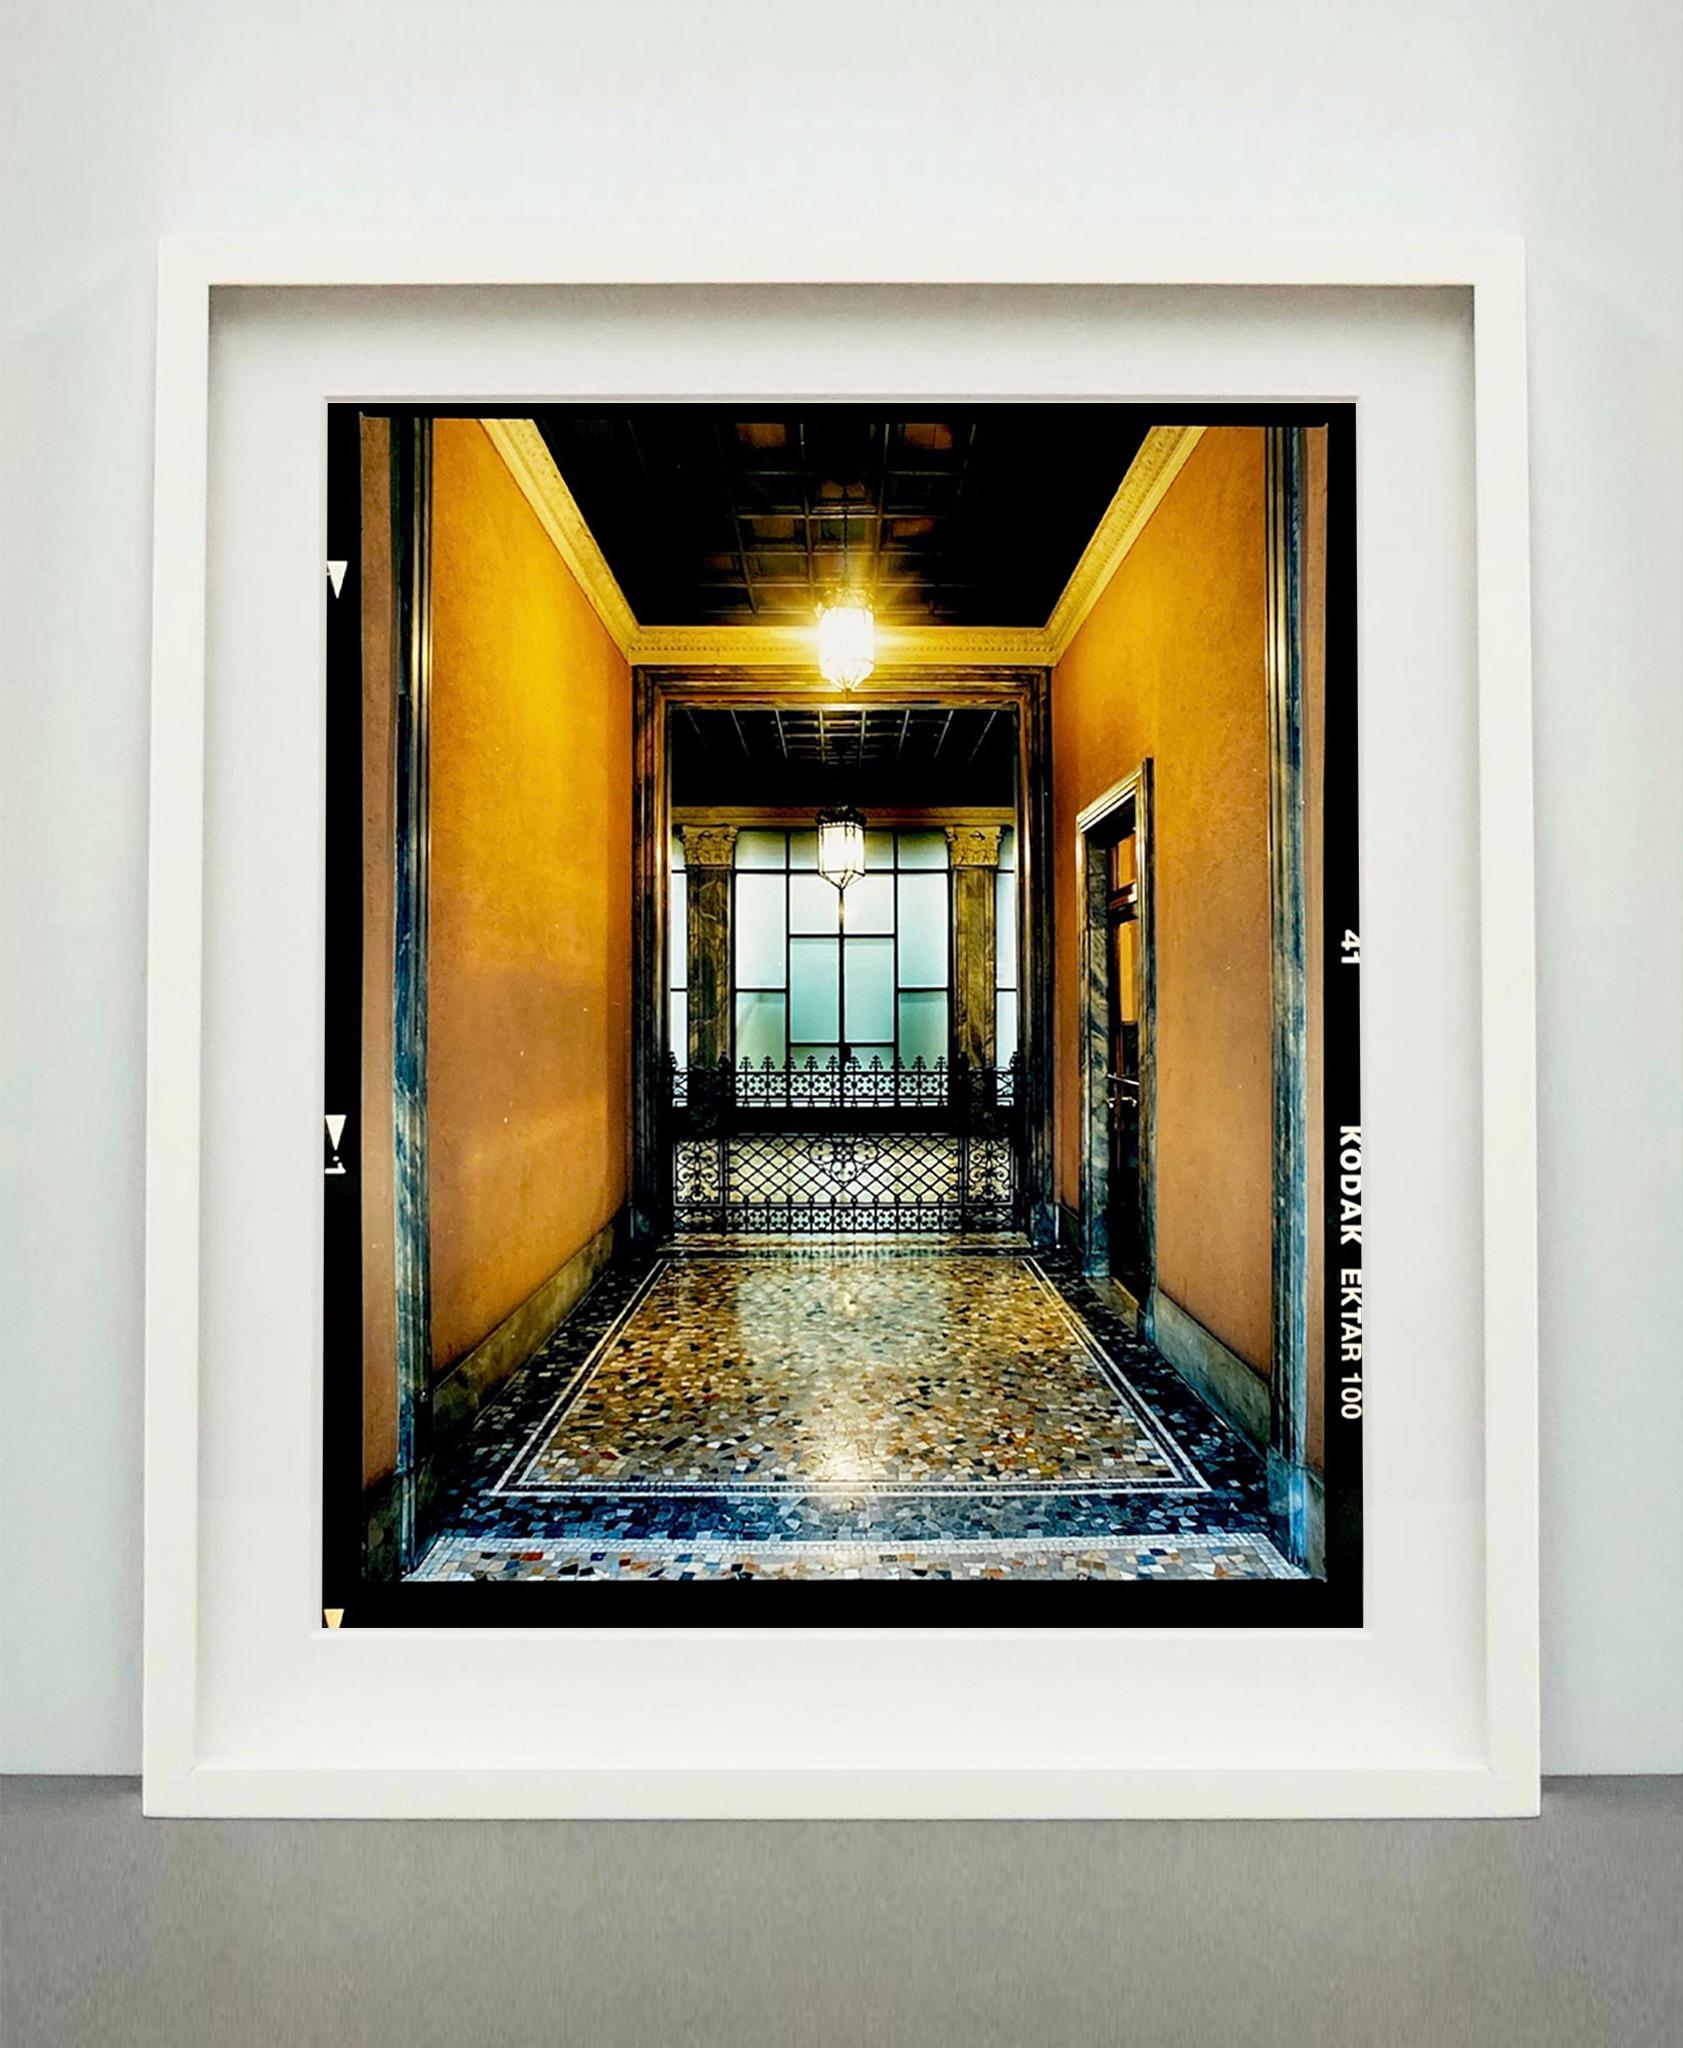 Foyer III, from Richard Heeps series, 'A Short History of Milan' which began in November 2018 for a special project featuring at the Affordable Art Fair Milan 2019 and the series is ongoing.
There is a reoccurring linear, structural theme throughout